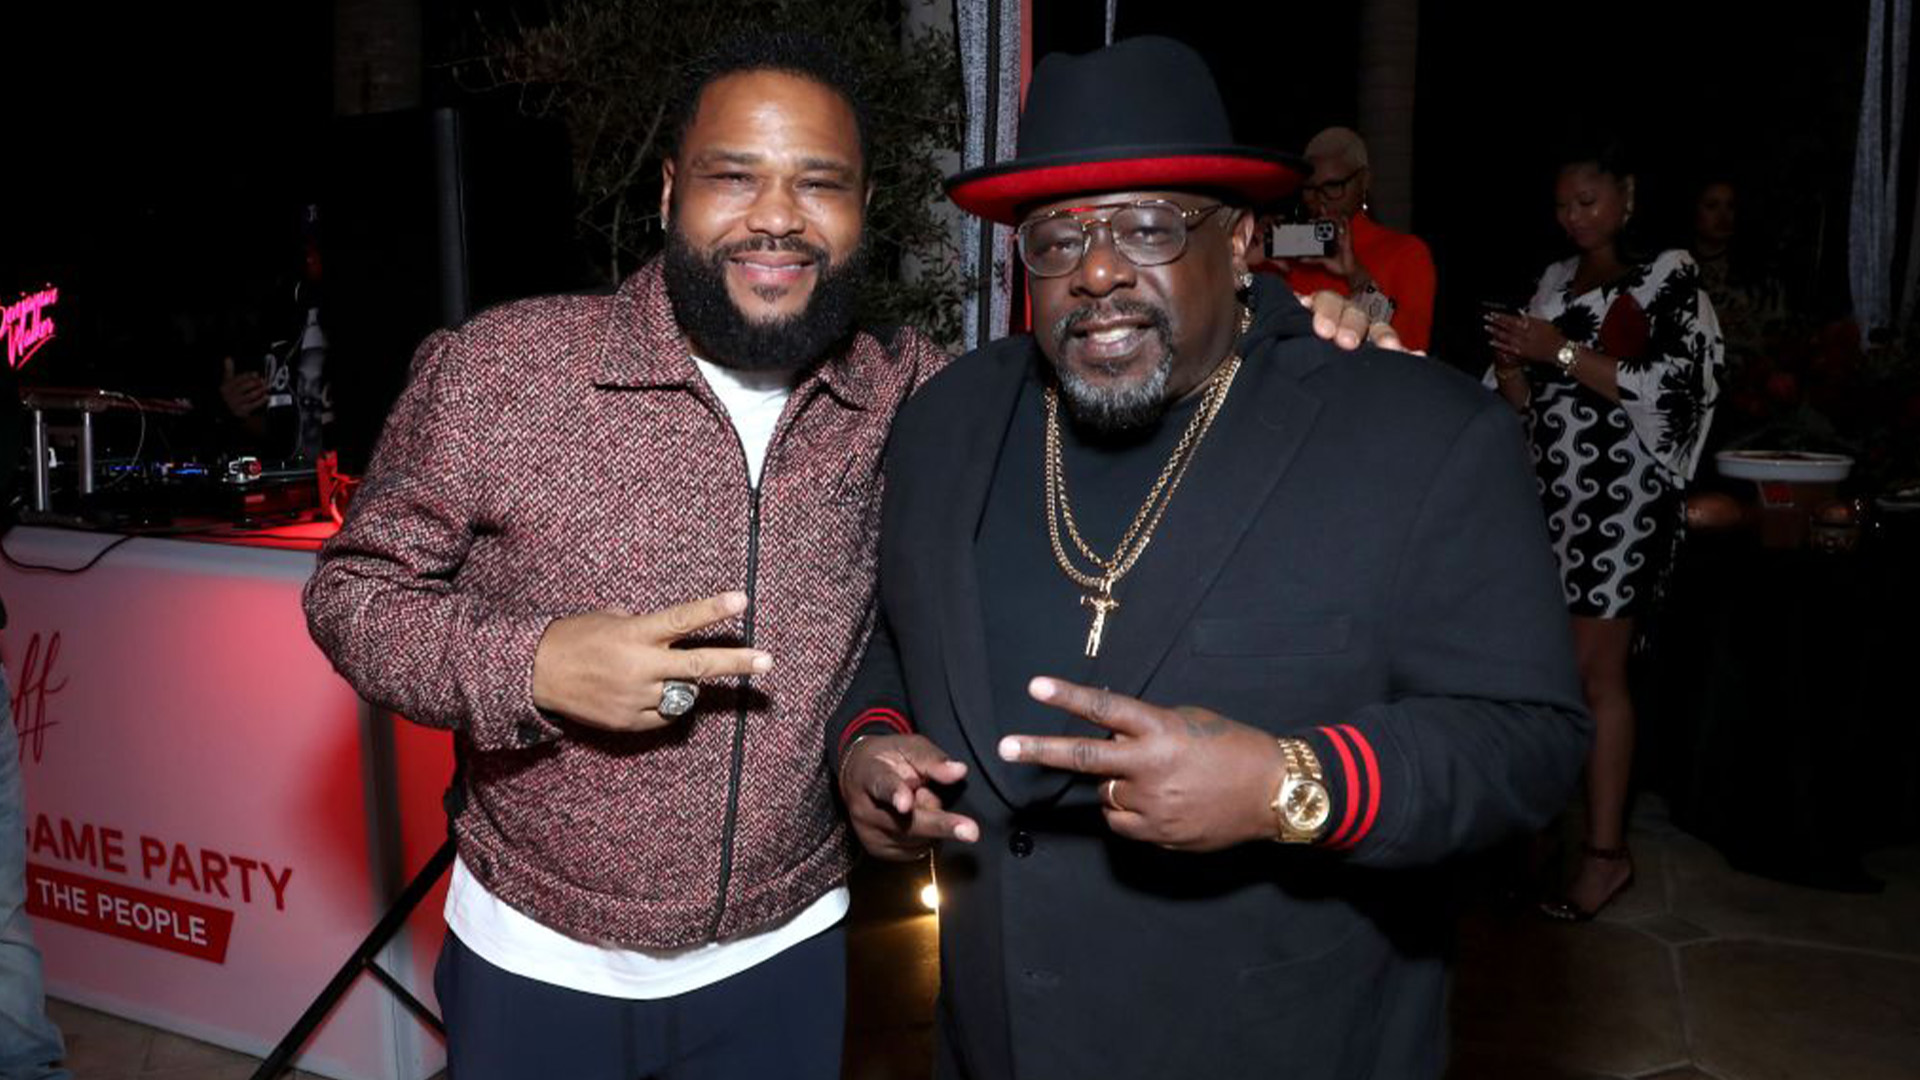 Cedric The Entertainer And Anthony Anderson Fulfill 'Lifelong Dream' With Their Own BBQ Brand